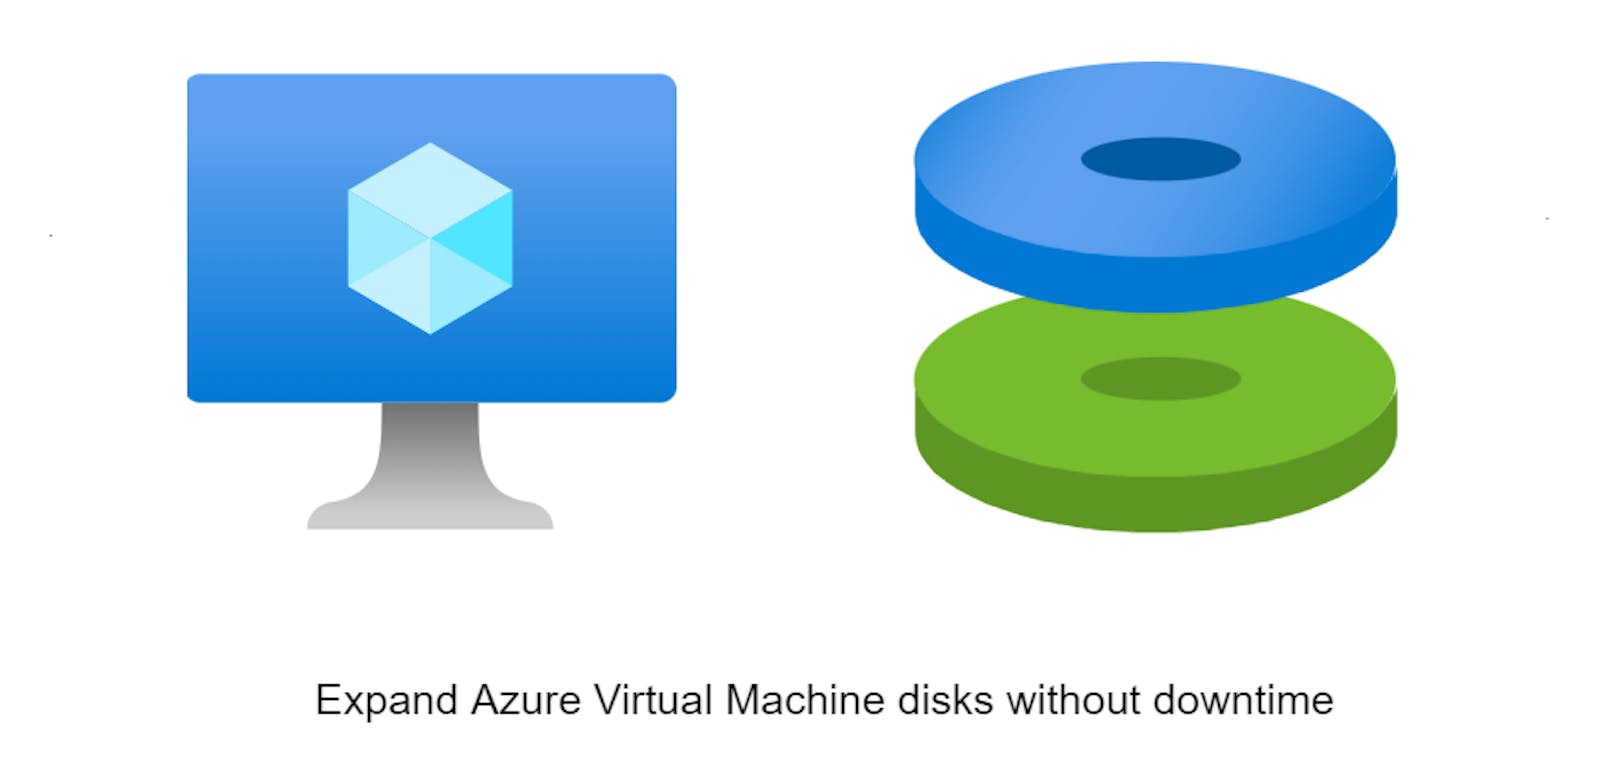 How To Attach A Data Disk To An Existing Virtual Machine And Initialize It For Use In Azure.